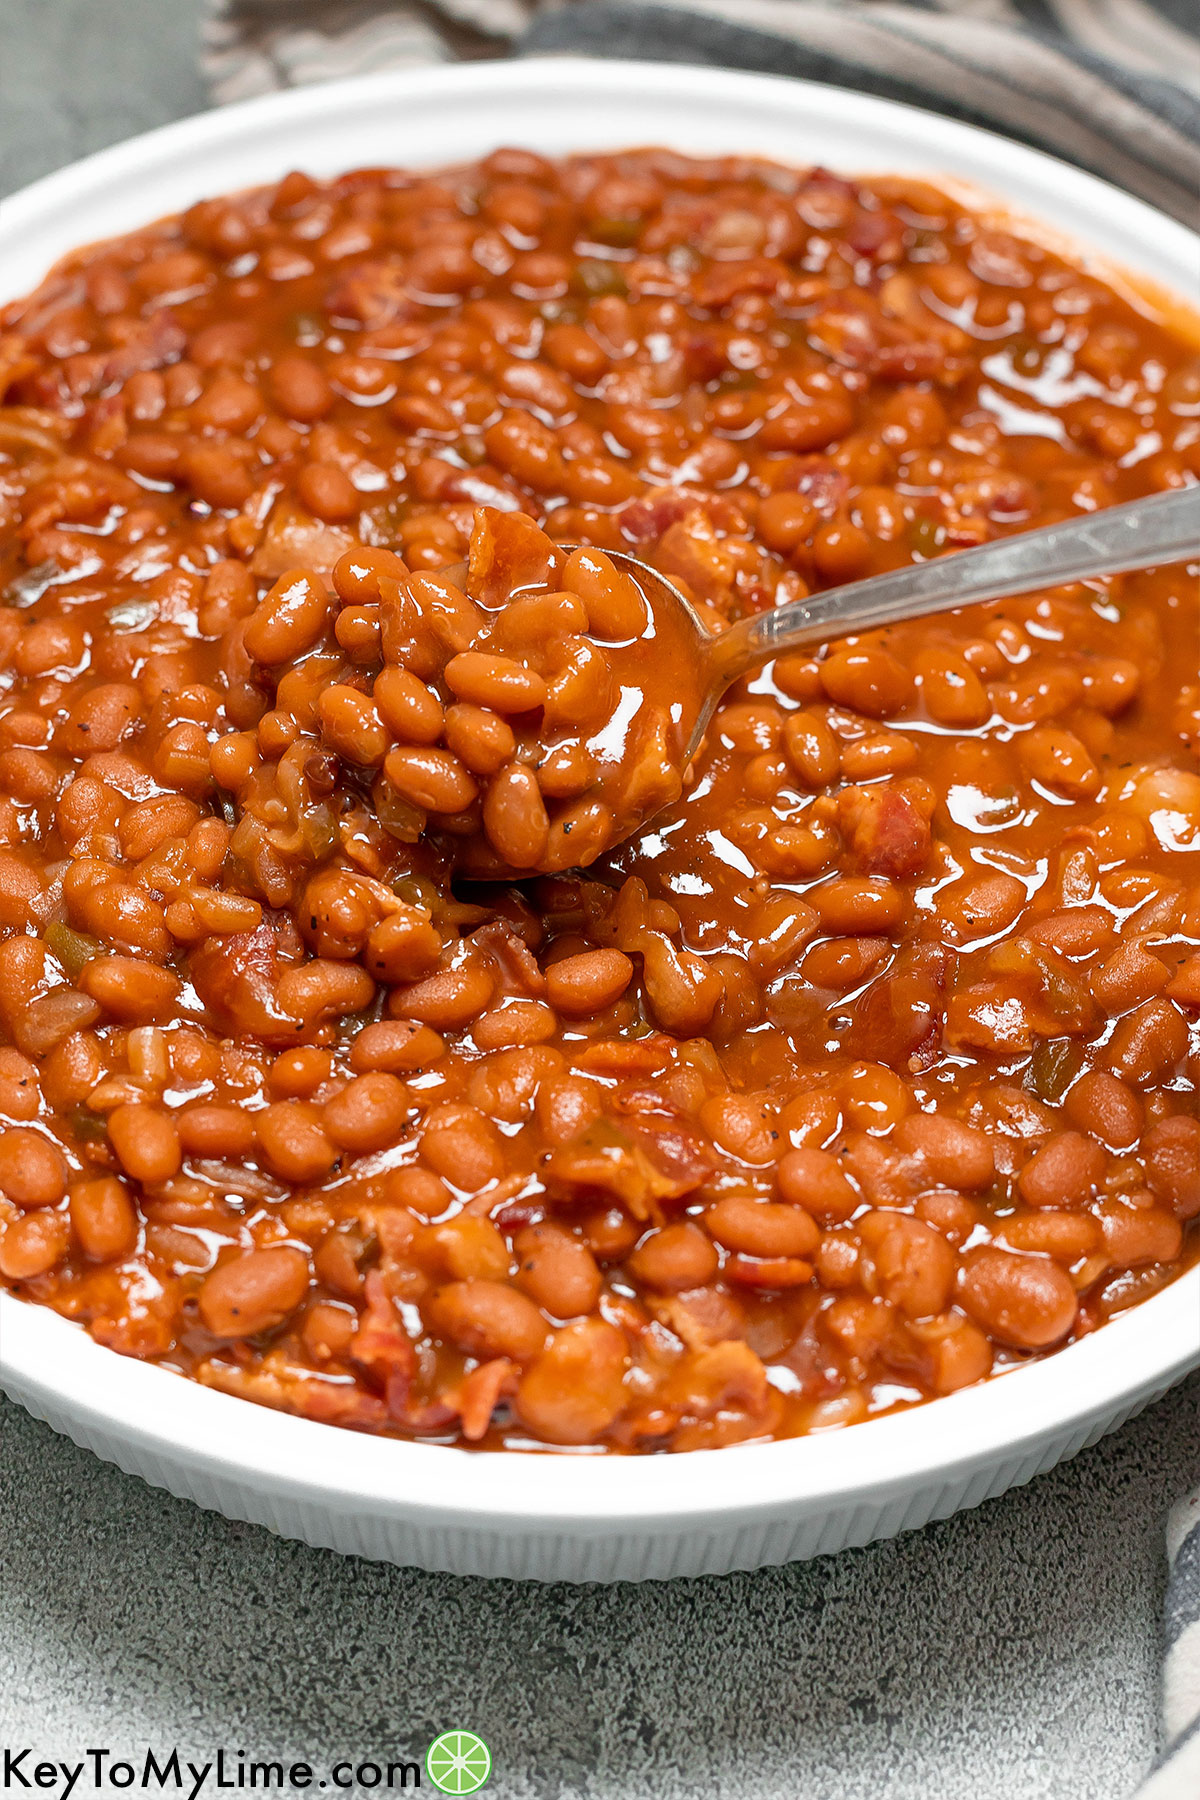 A serving spoon lifting baked beans up with green peppers and bacon pieces throughout.